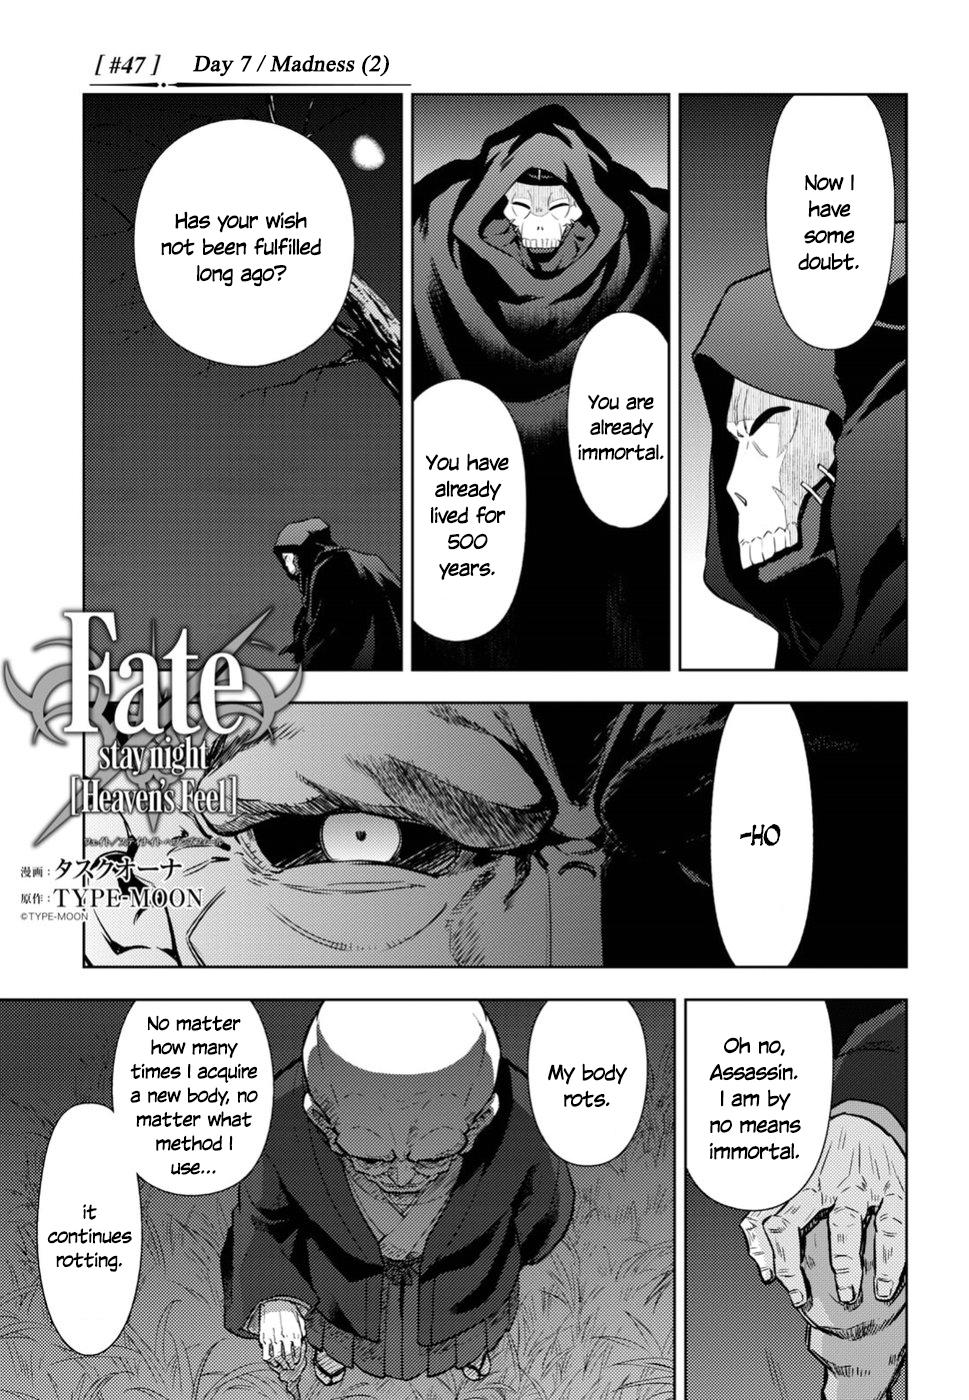 Fate/stay night: Heaven's Feel Vol. 8 Ch. 47 Day 7 / Madness (2)